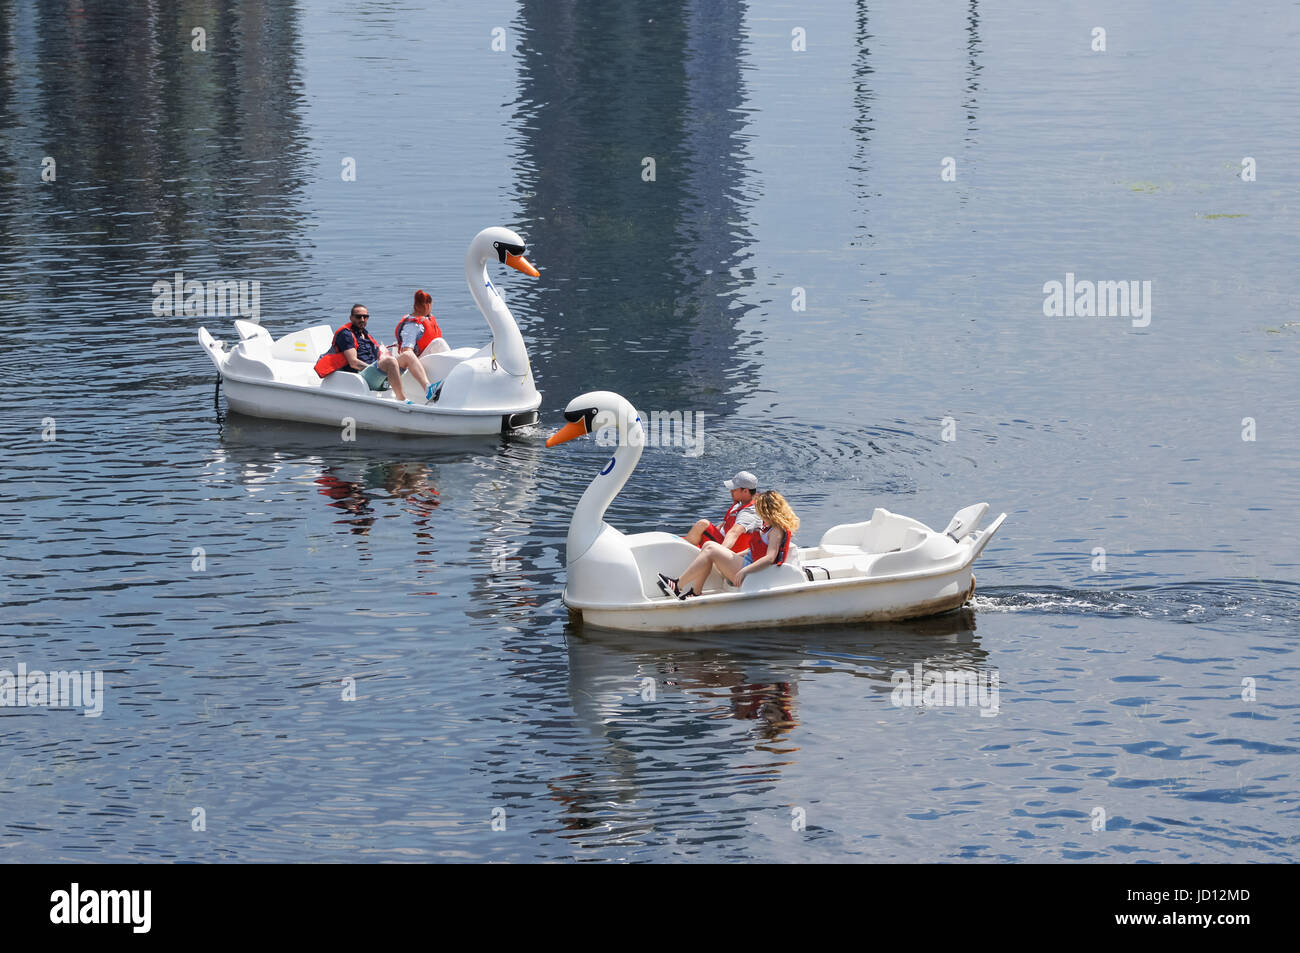 People enjoy hot day in swan pedalos on the river Lea at the Queen Elizabeth Olympic Park, London England United Kingdom UK Stock Photo